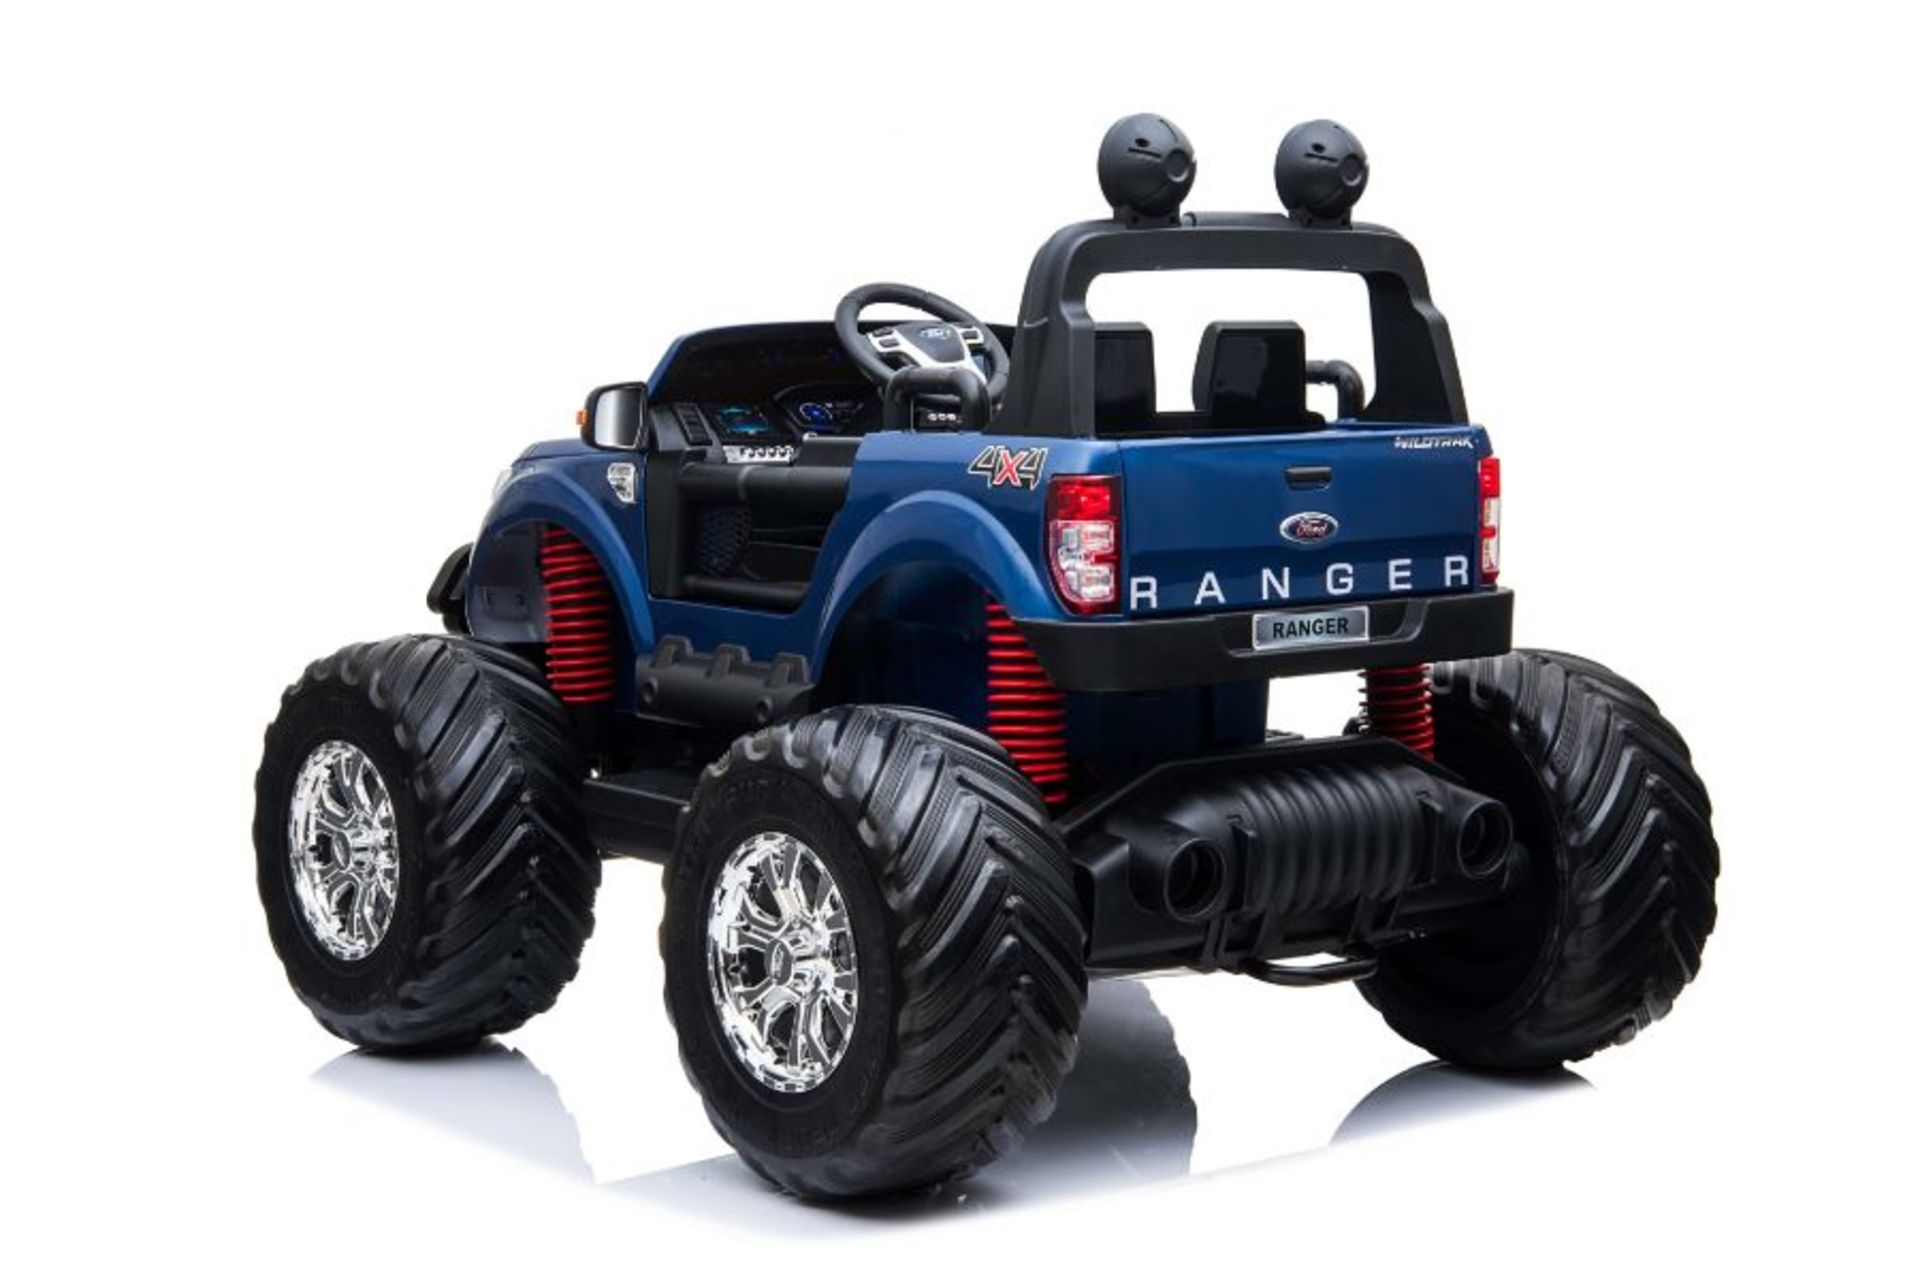 Ride On Fully Licenced Ford Ranger Monster Truck 12v with Parental Remote Control - Blue - Image 5 of 8